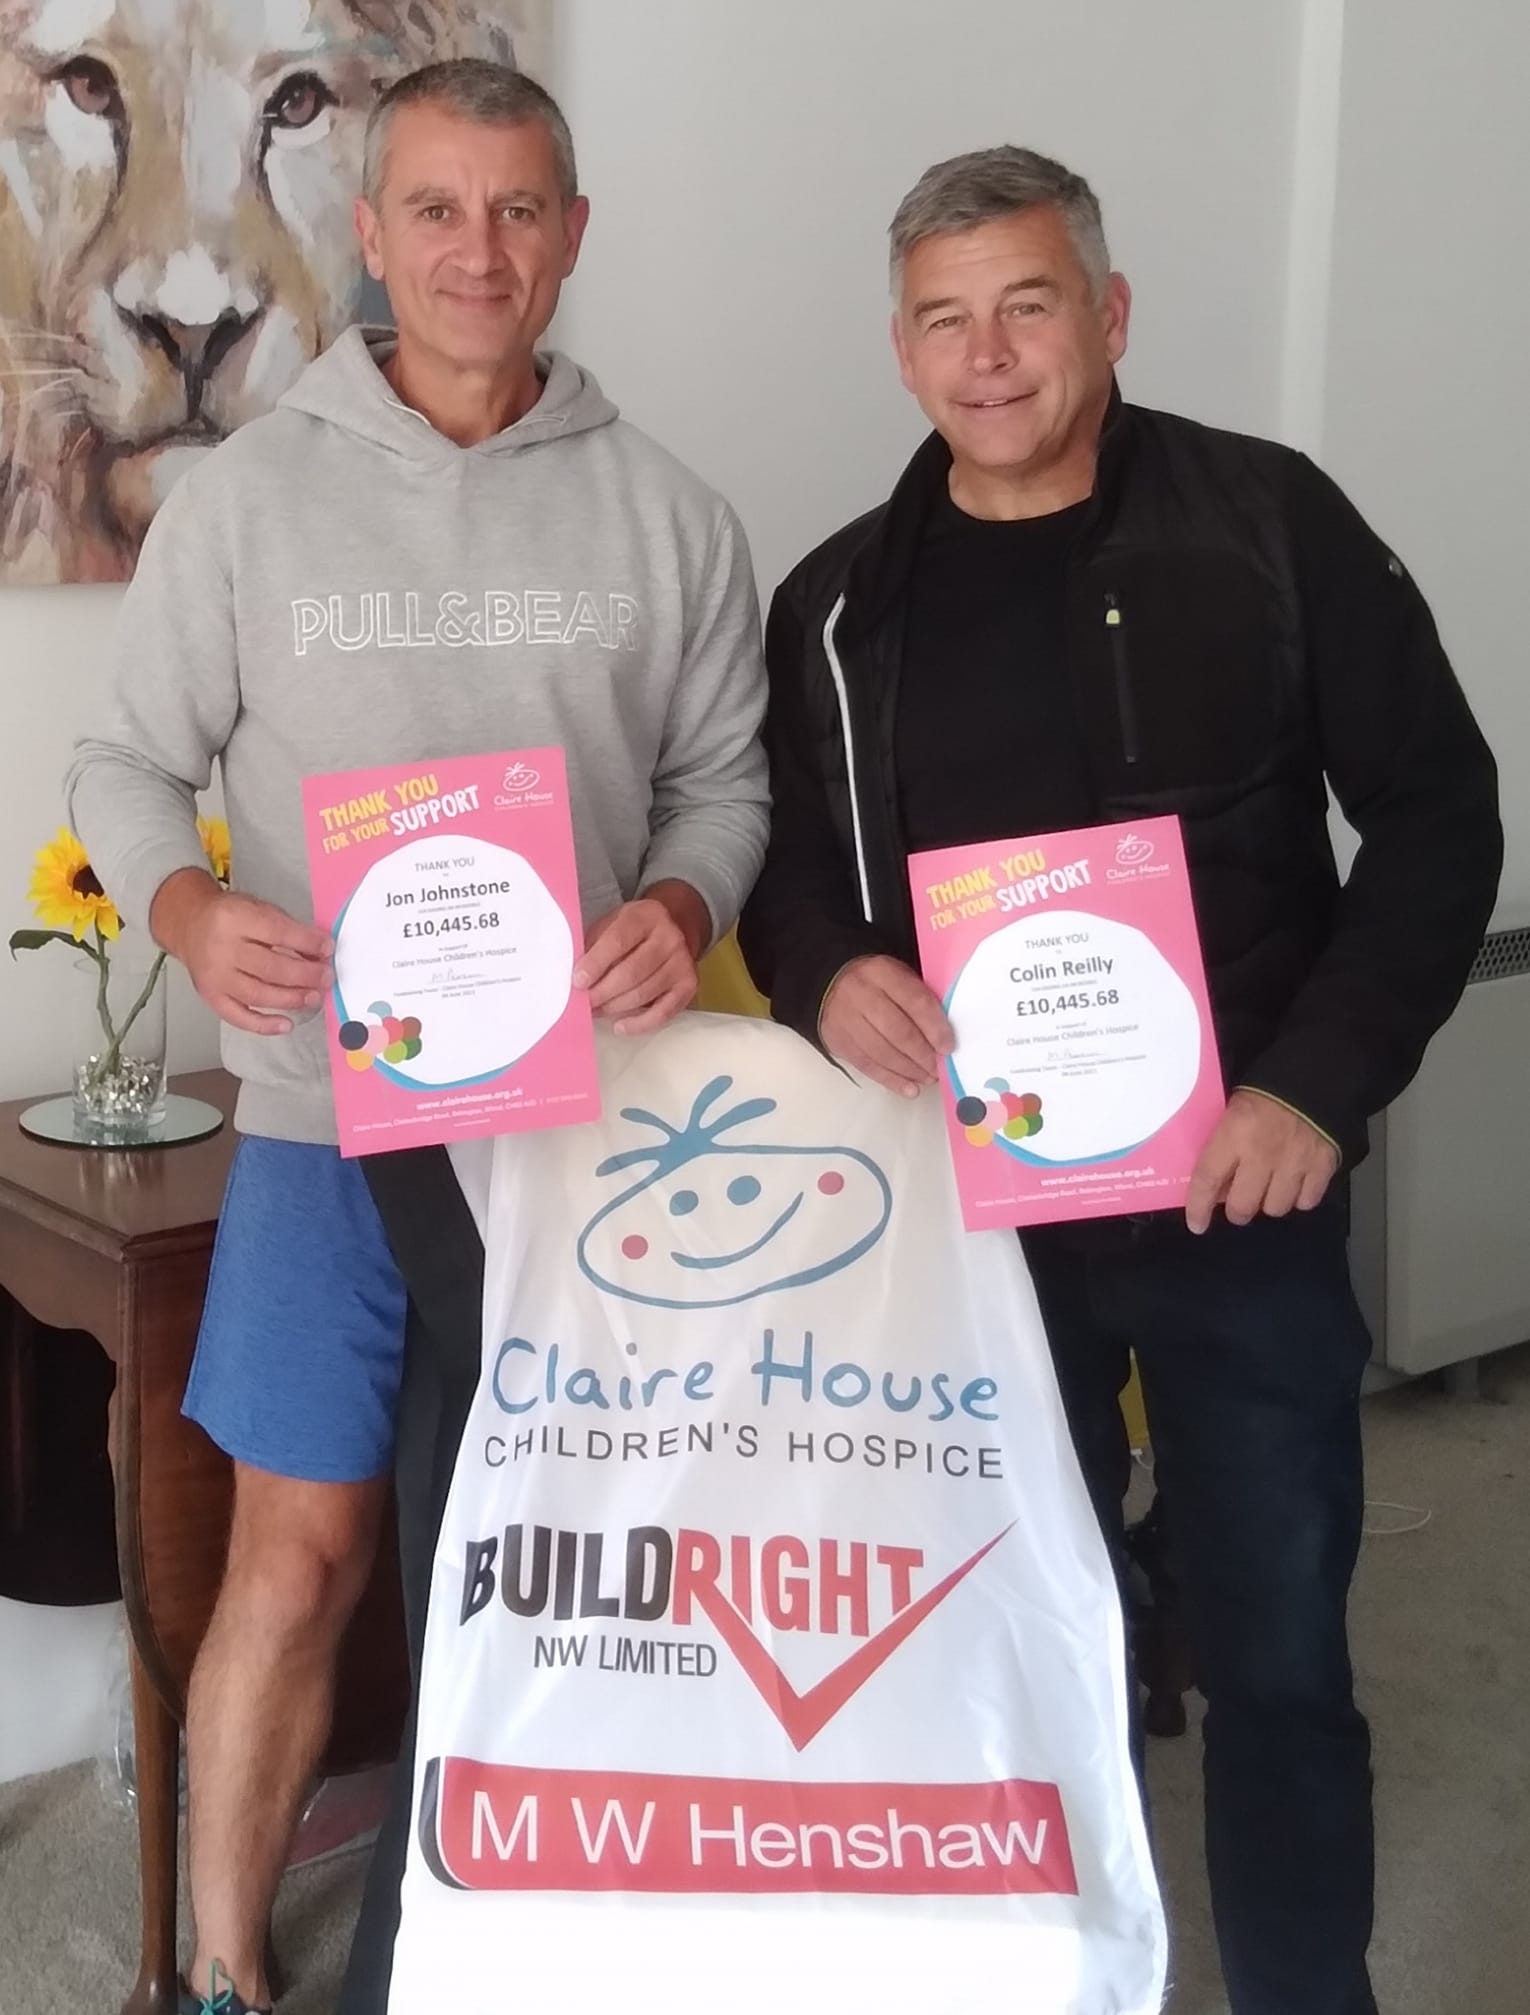 Jonny Johnstone and Colin Reilly have been thanked for raising £10,000 for Claire House childrens hospice by running up and down sandhills in Southport 500 times